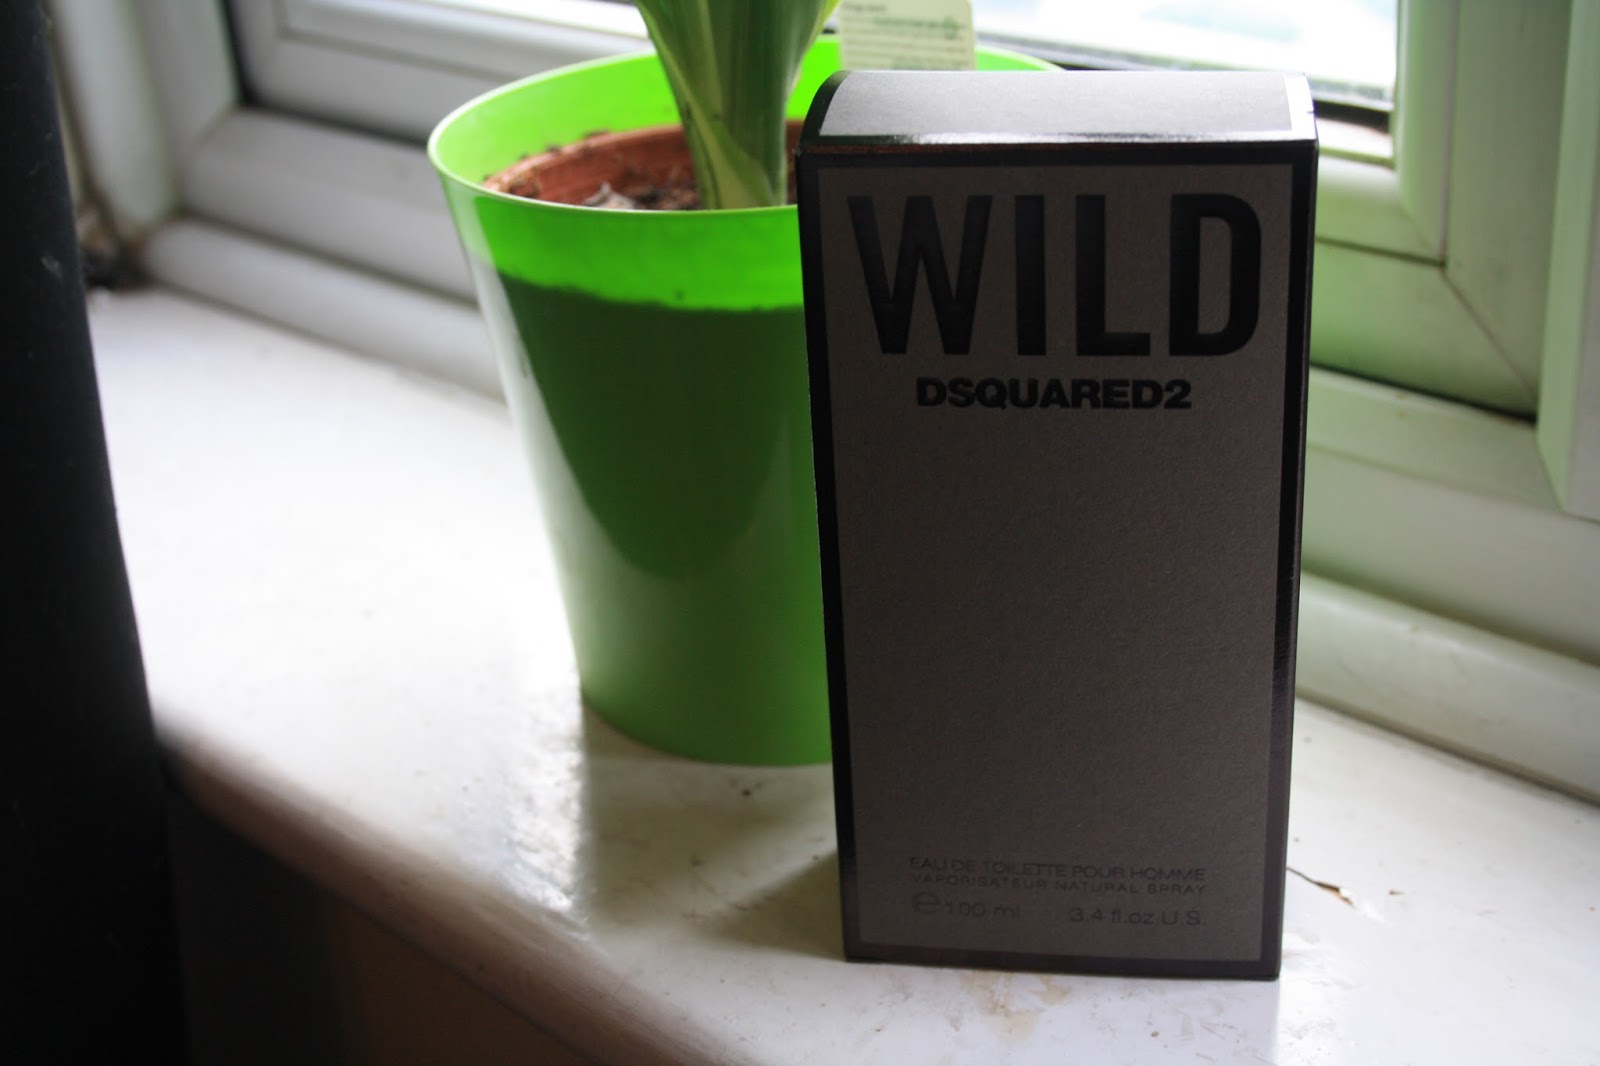 Wild by DSquared2